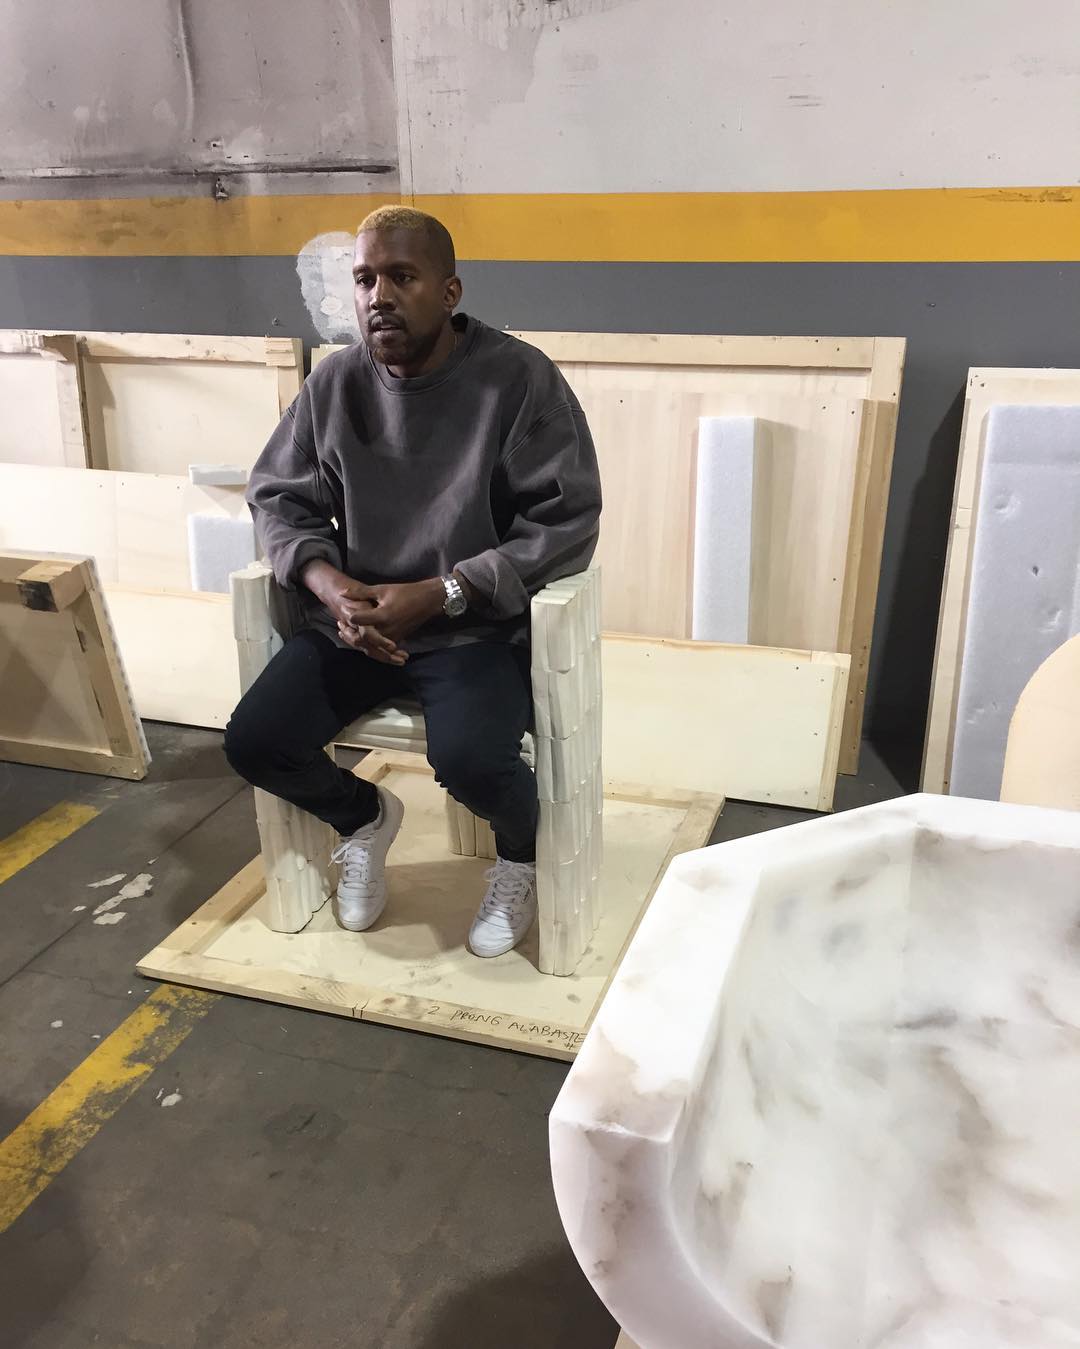 Kanye West's First Appearance Since Hospital In Unreleased Adidas